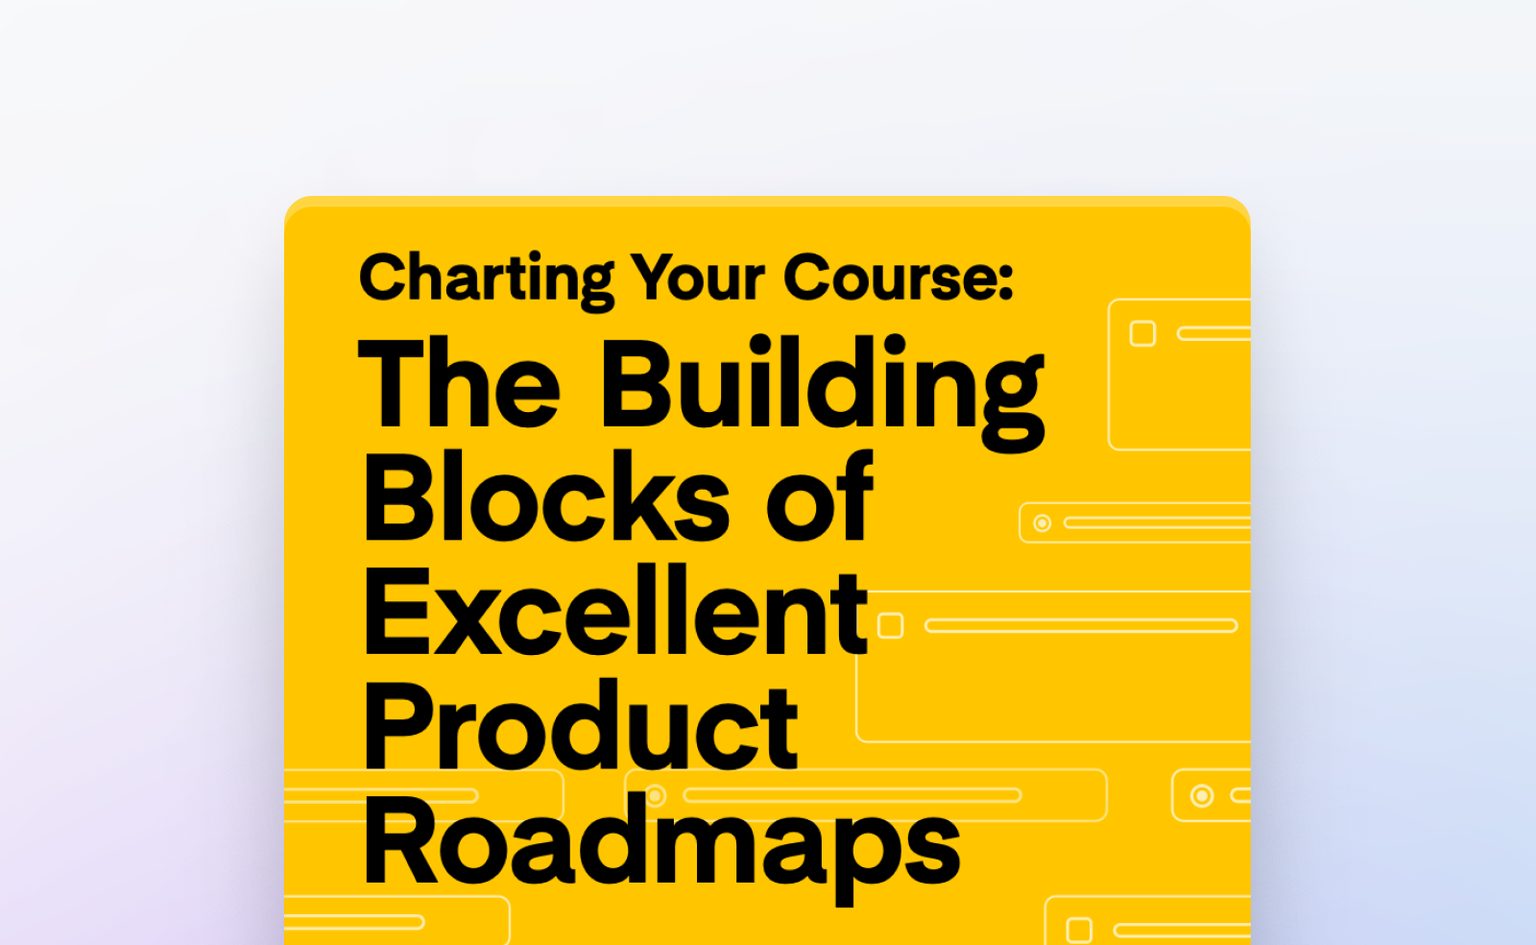 The building blocks of excellent product roadmaps